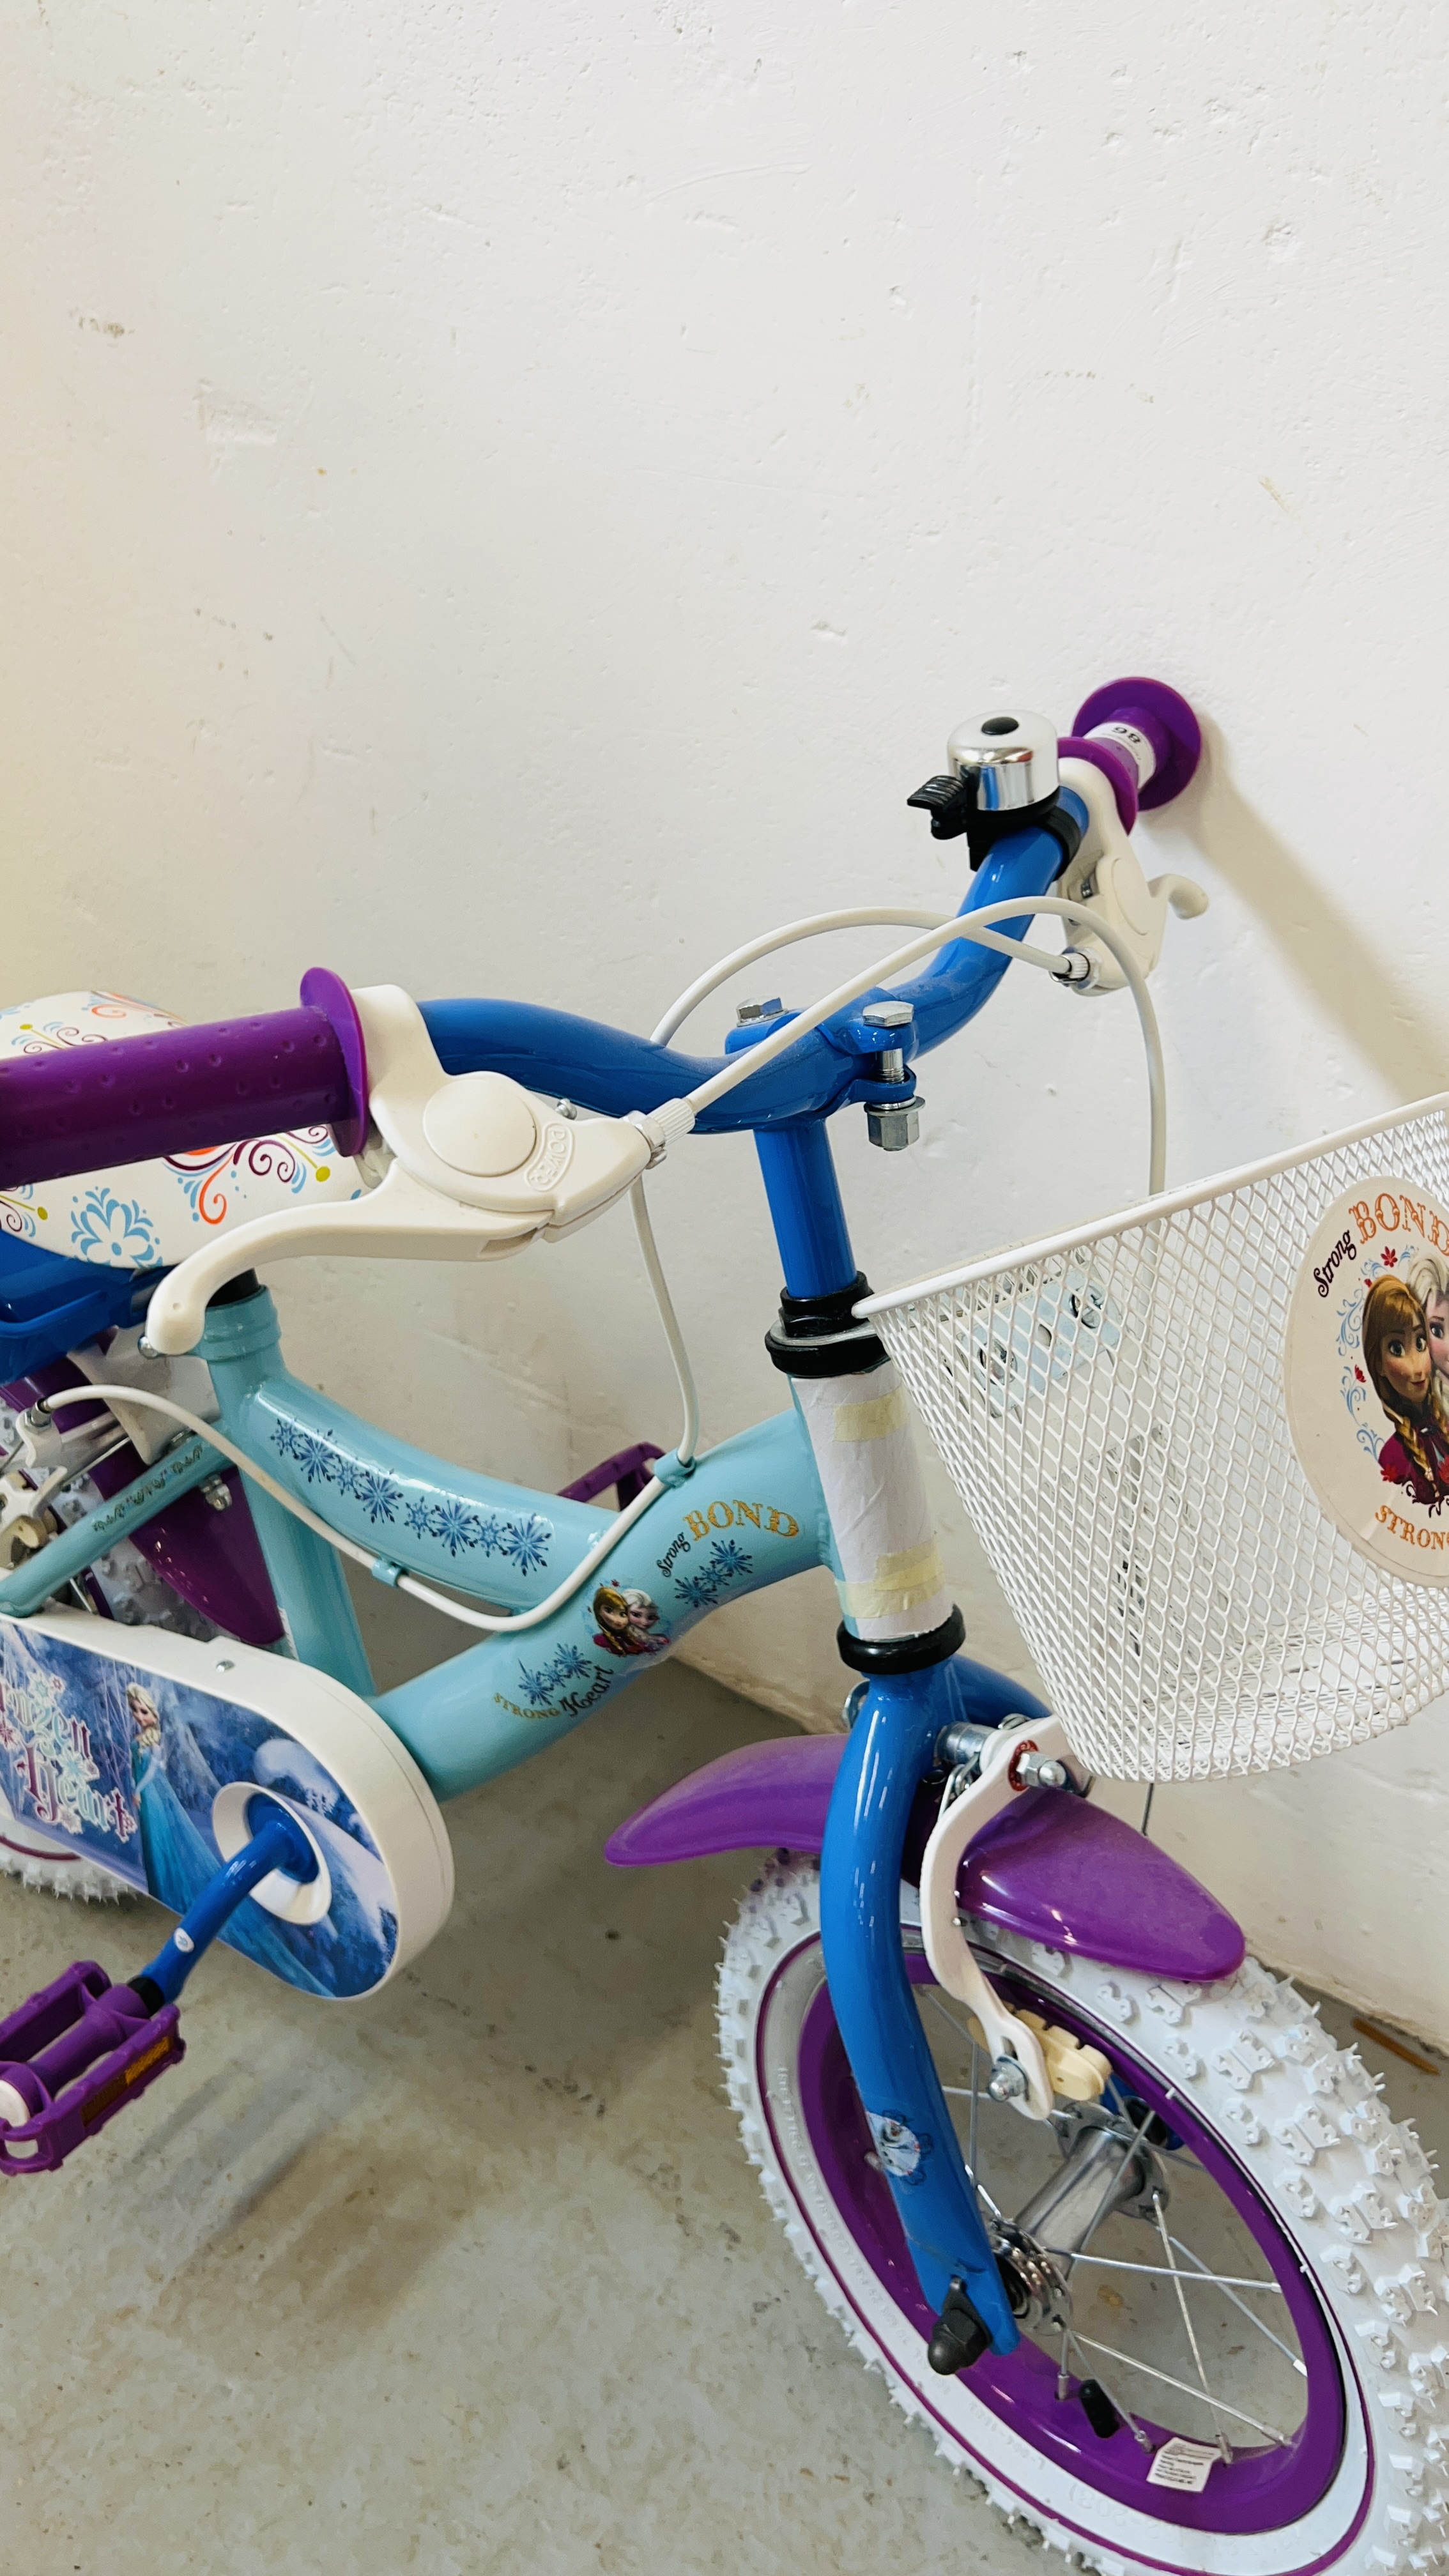 AN AS NEW GIRLS BIKE WITH STABLISIERS "FROZEN" RELATED. - Image 3 of 9